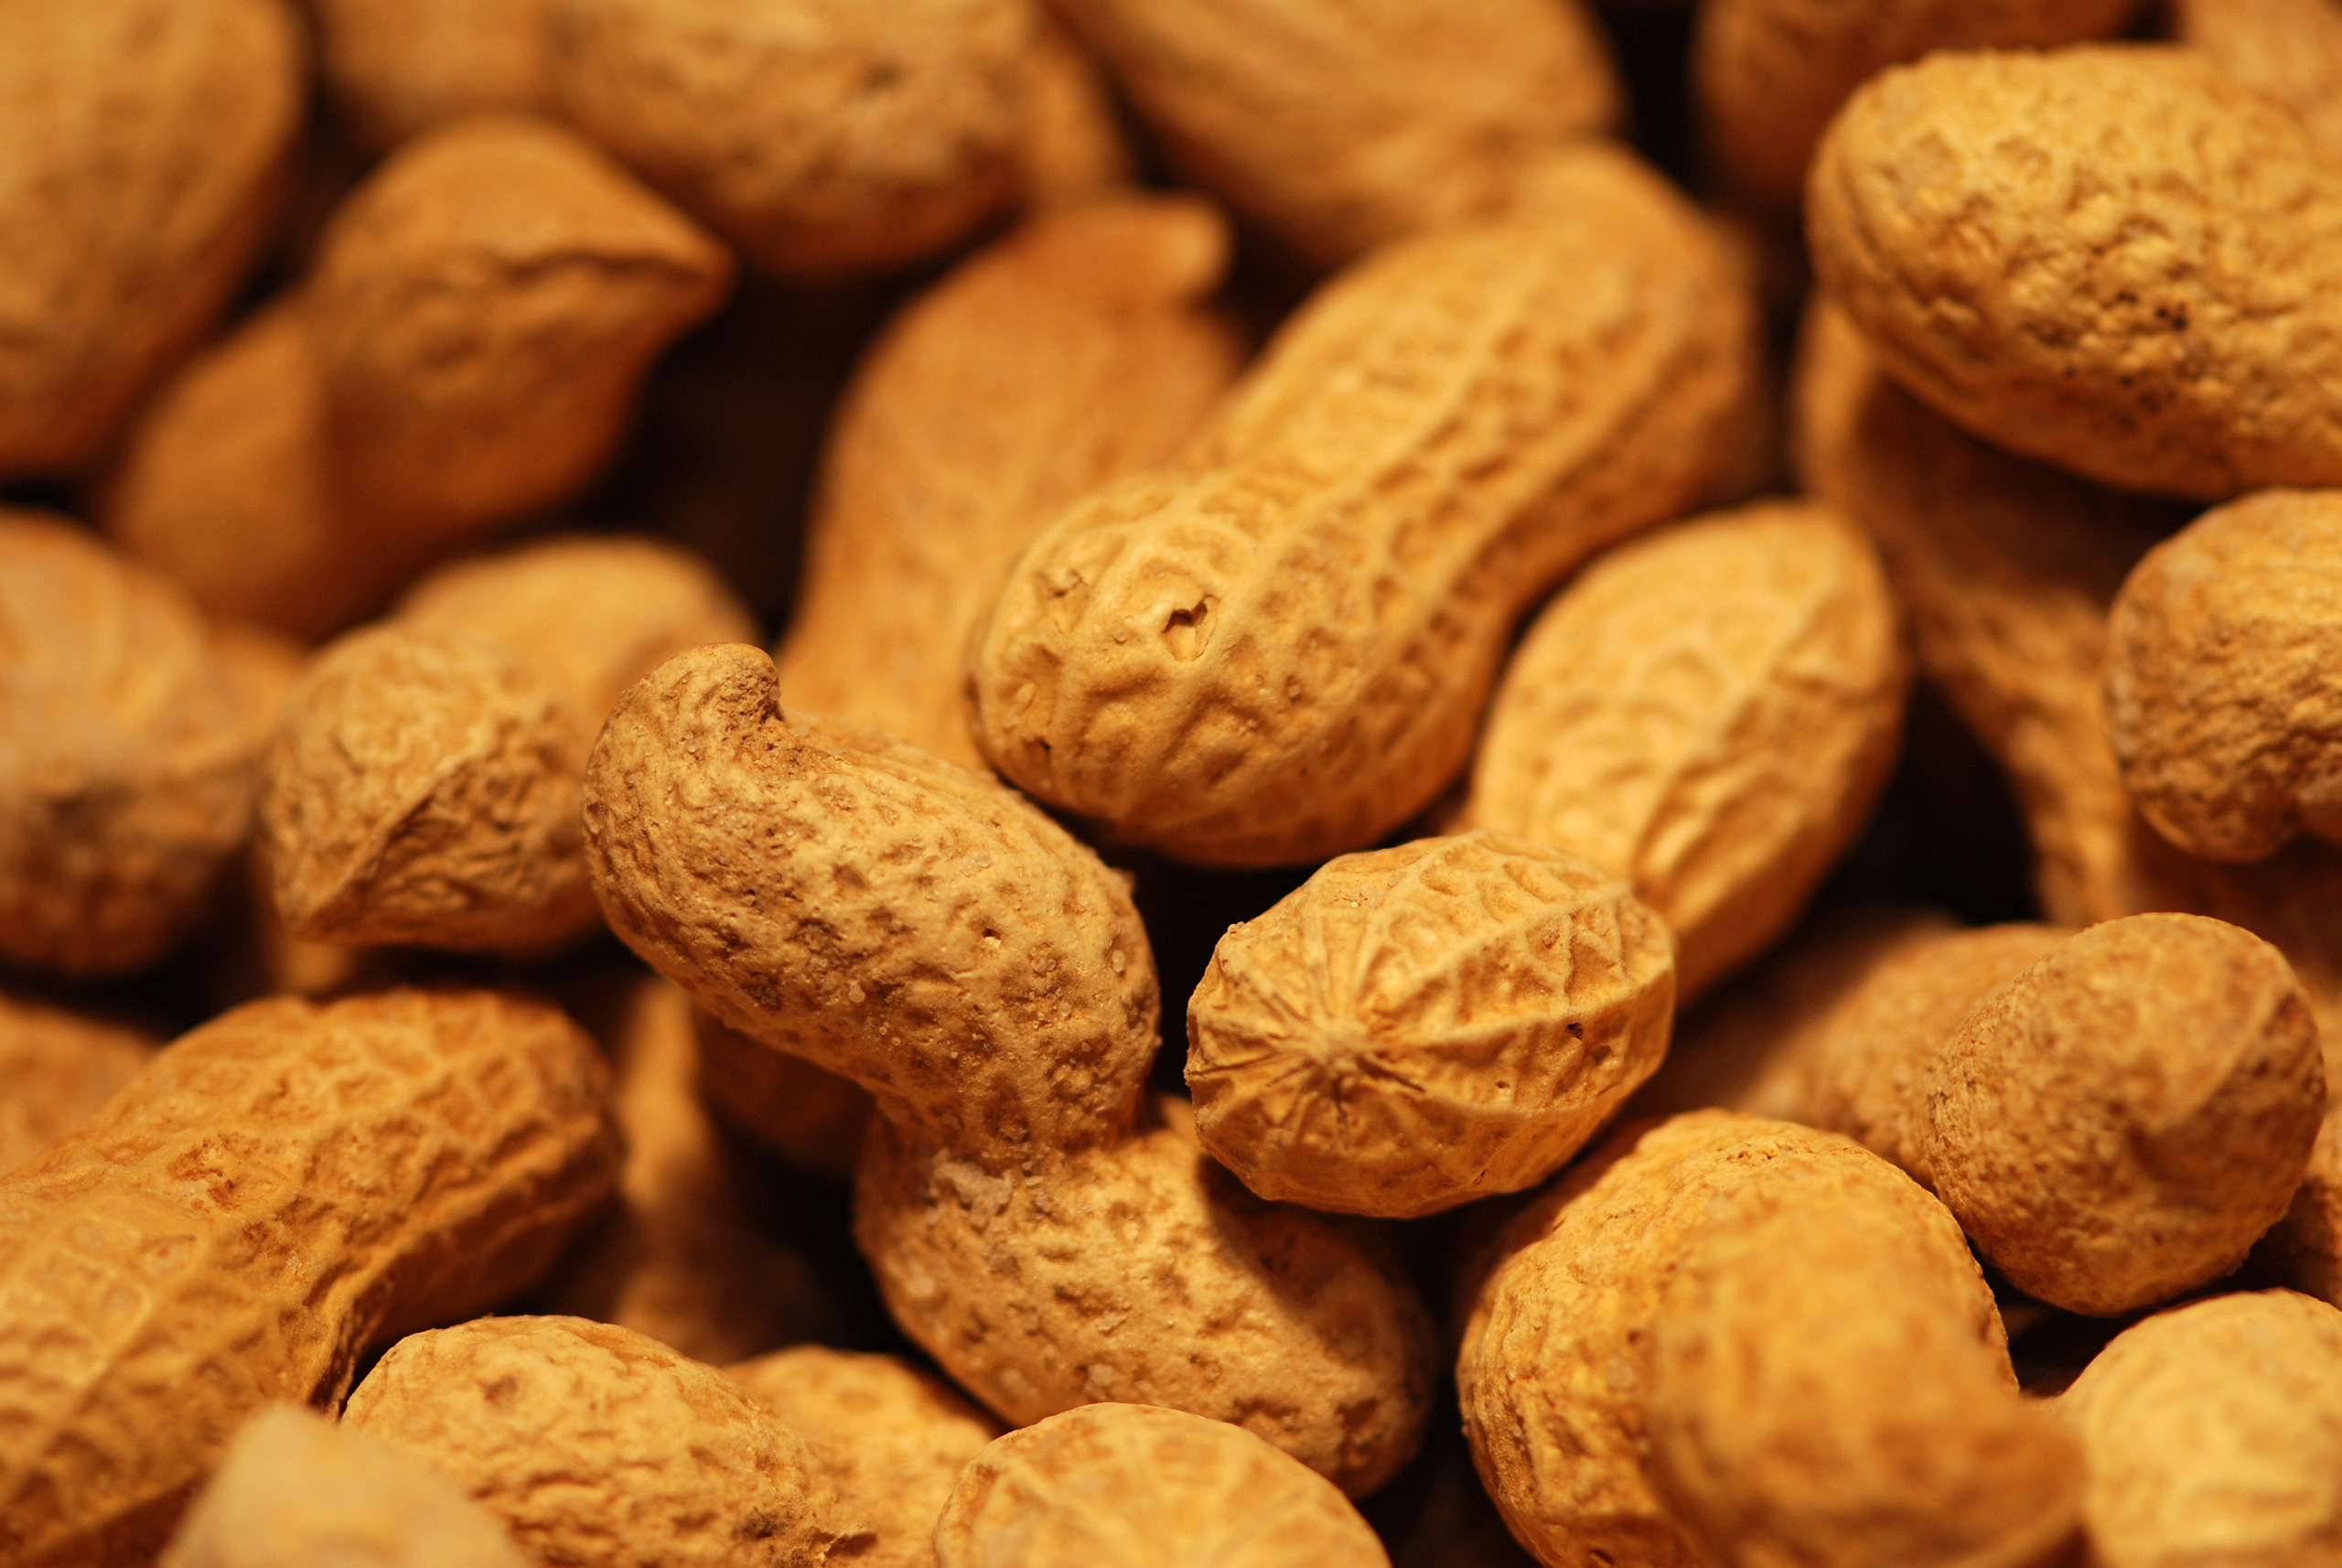 Peanuts (Food), Crunchy snack, Assorted nuts, Nut lover's paradise, 2560x1720 HD Desktop